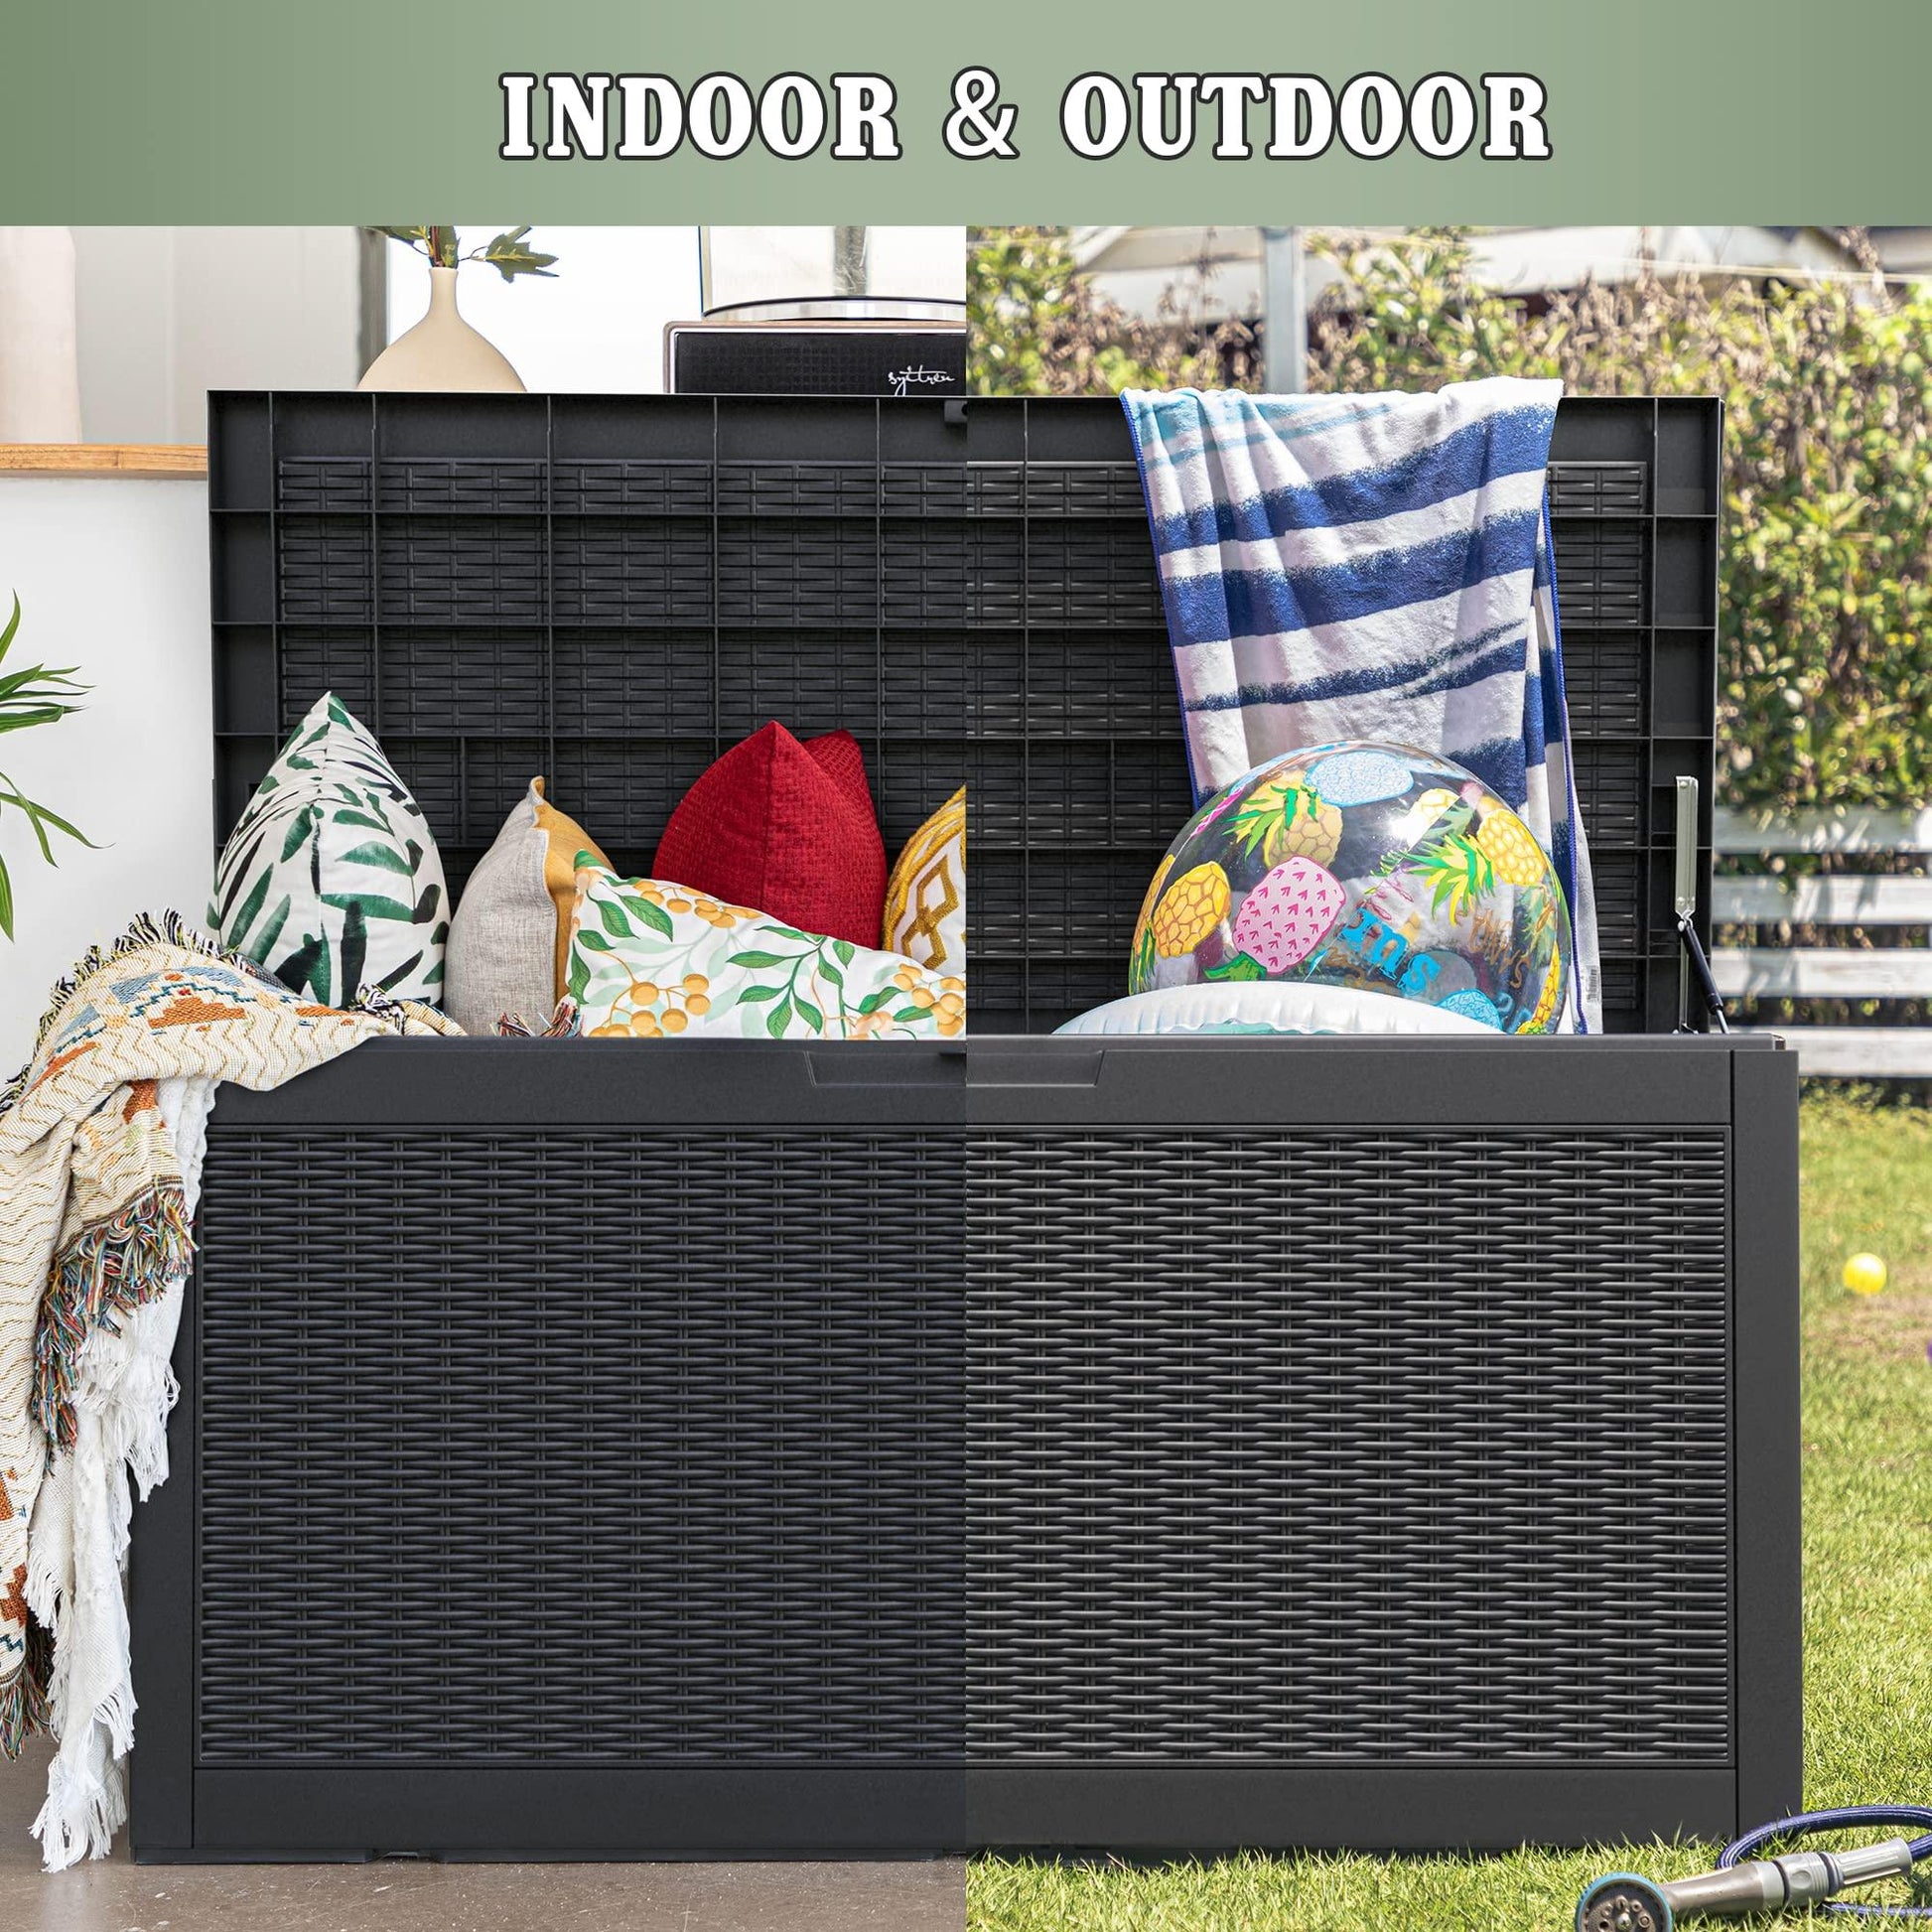 Devoko 100 Gallon Waterproof Large Resin Deck Box Indoor Outdoor Lockable Storage Container for Patio Furniture Cushions, Toys and Garden Tools (100 Gallon, Black) - CookCave